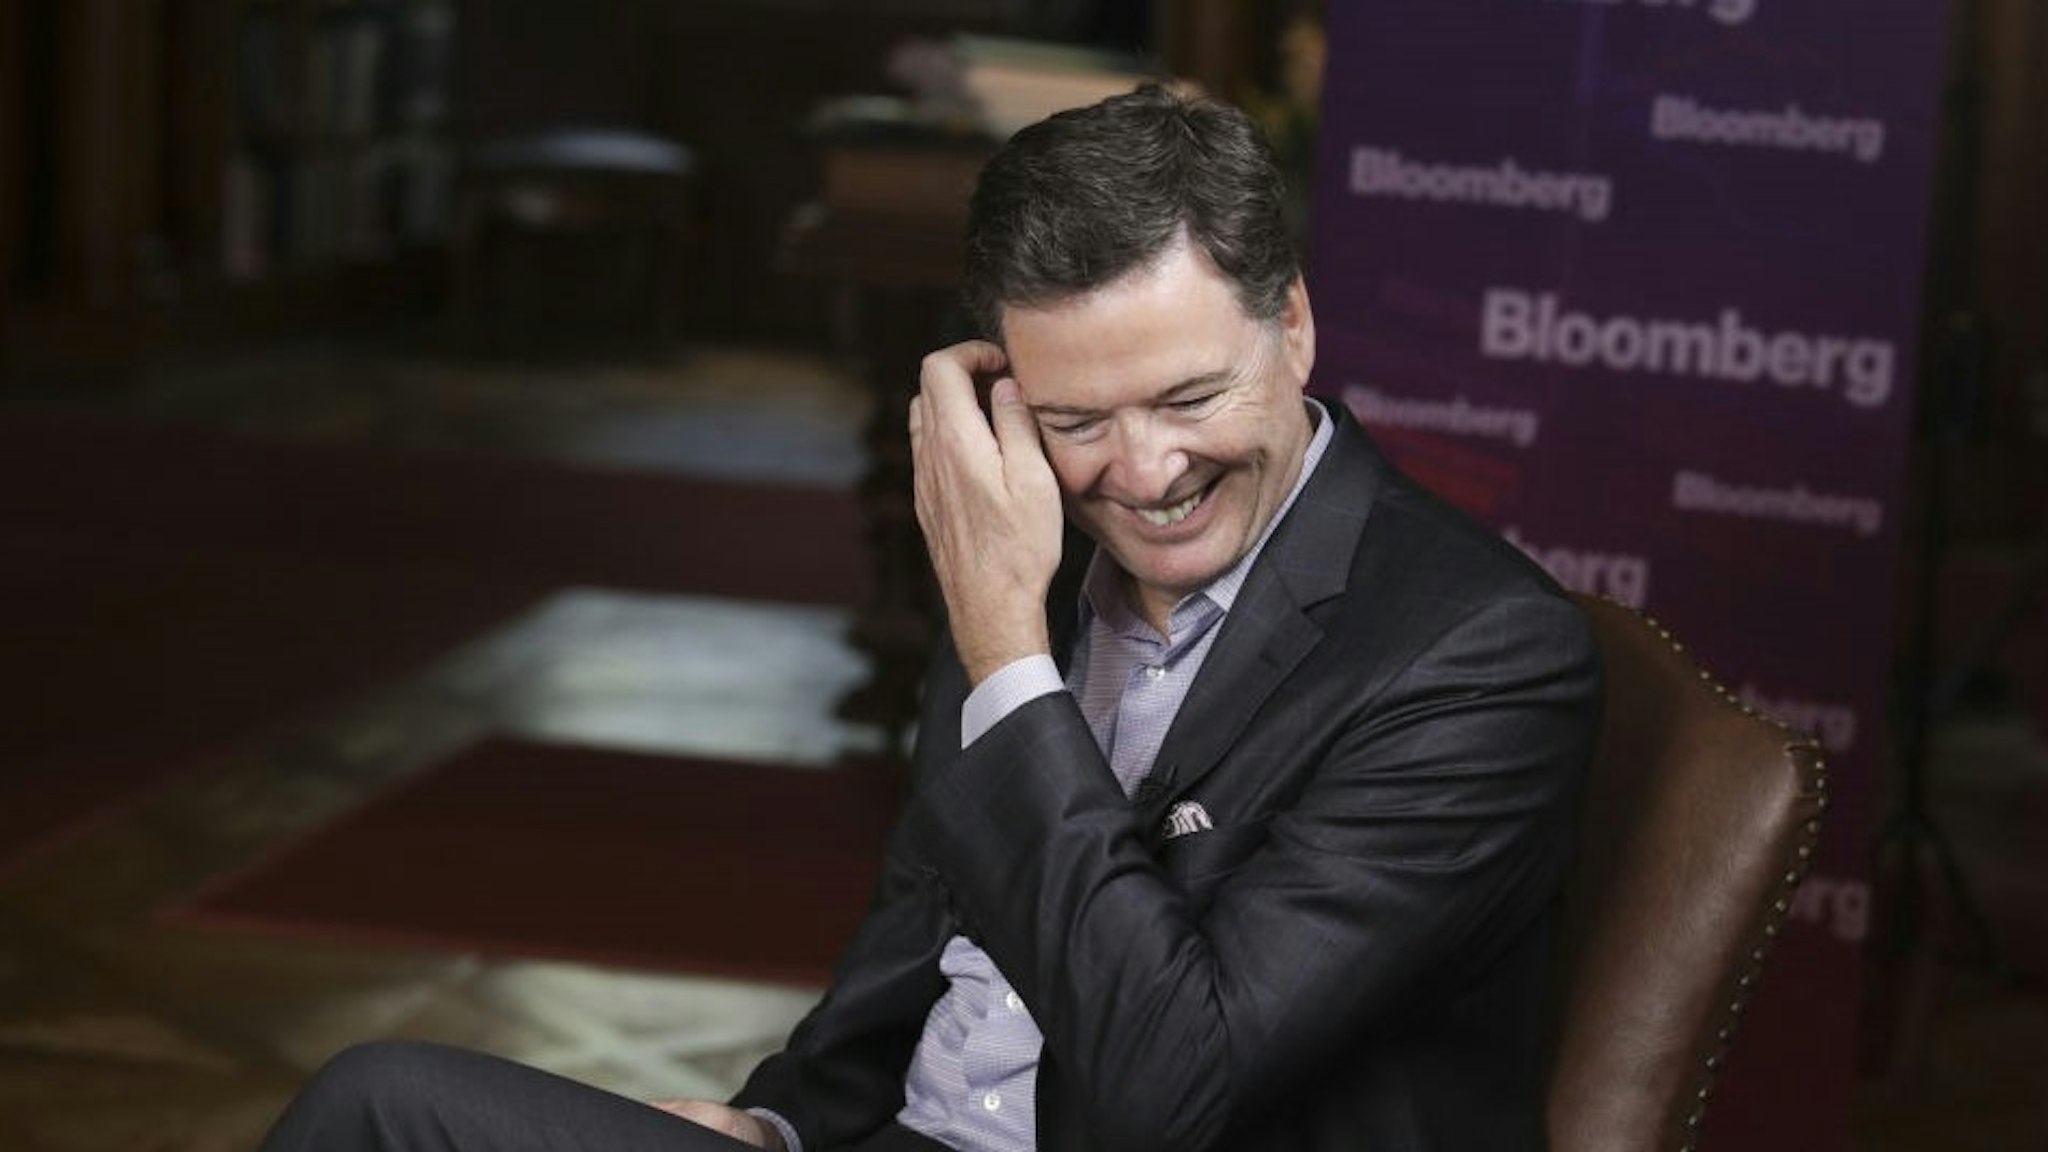 James Comey, former director of the Federal Bureau of Investigation (FBI), reacts during a Bloomberg Television interview in Salzburg, Austria, on Friday, June 21, 2019. Comey said he hopes President Donald Trump isnt impeached because "that would let the American people off the hook." Photographer: